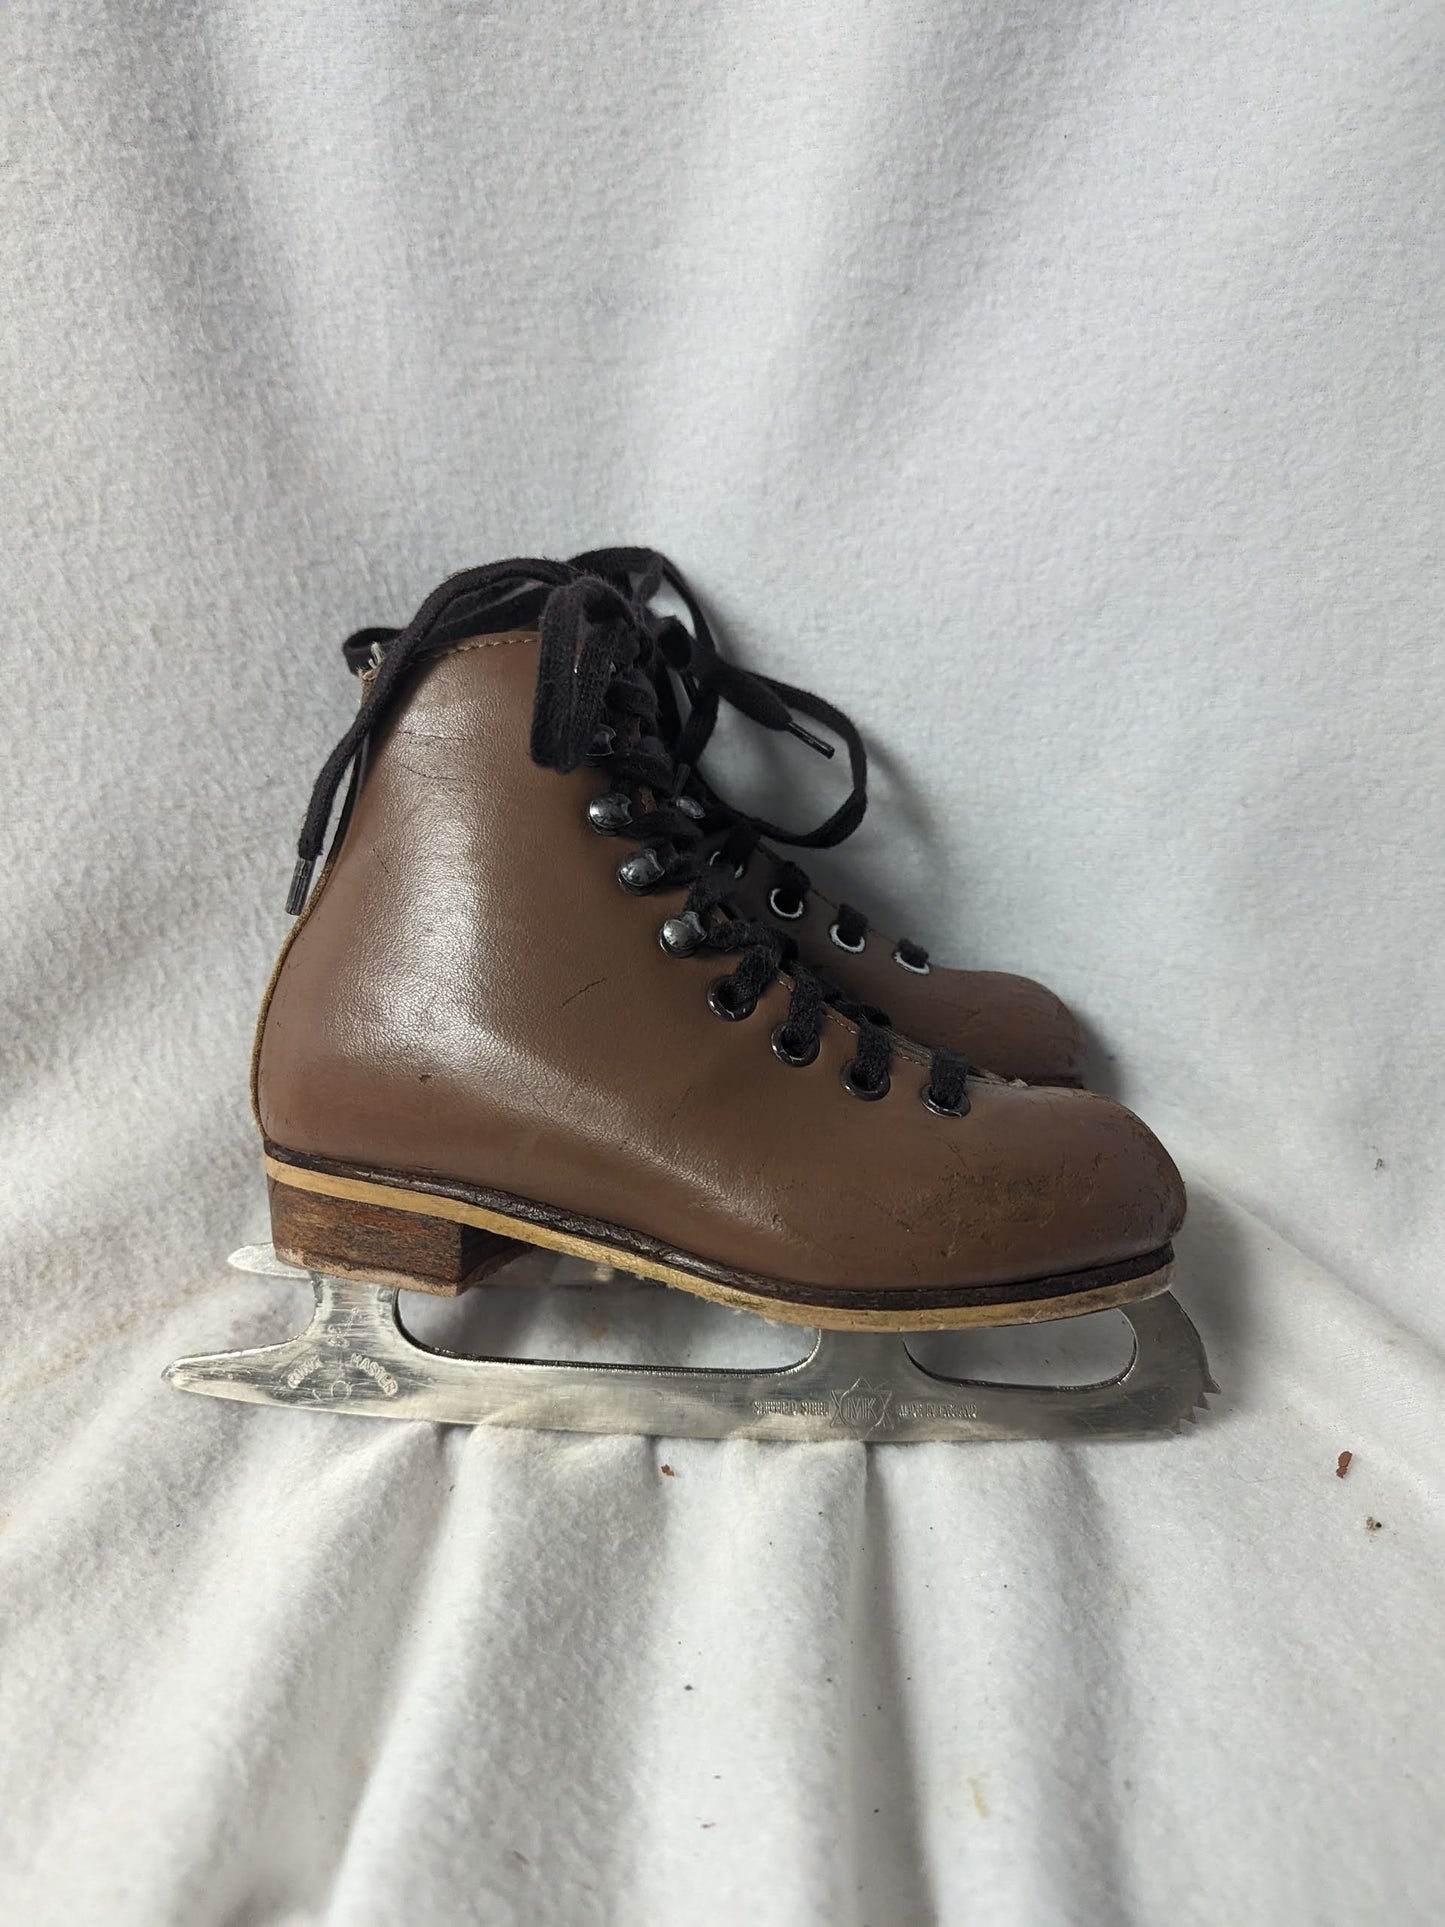 Rink Master Ice Skates Size Youth 11 Color Brown Condition Used